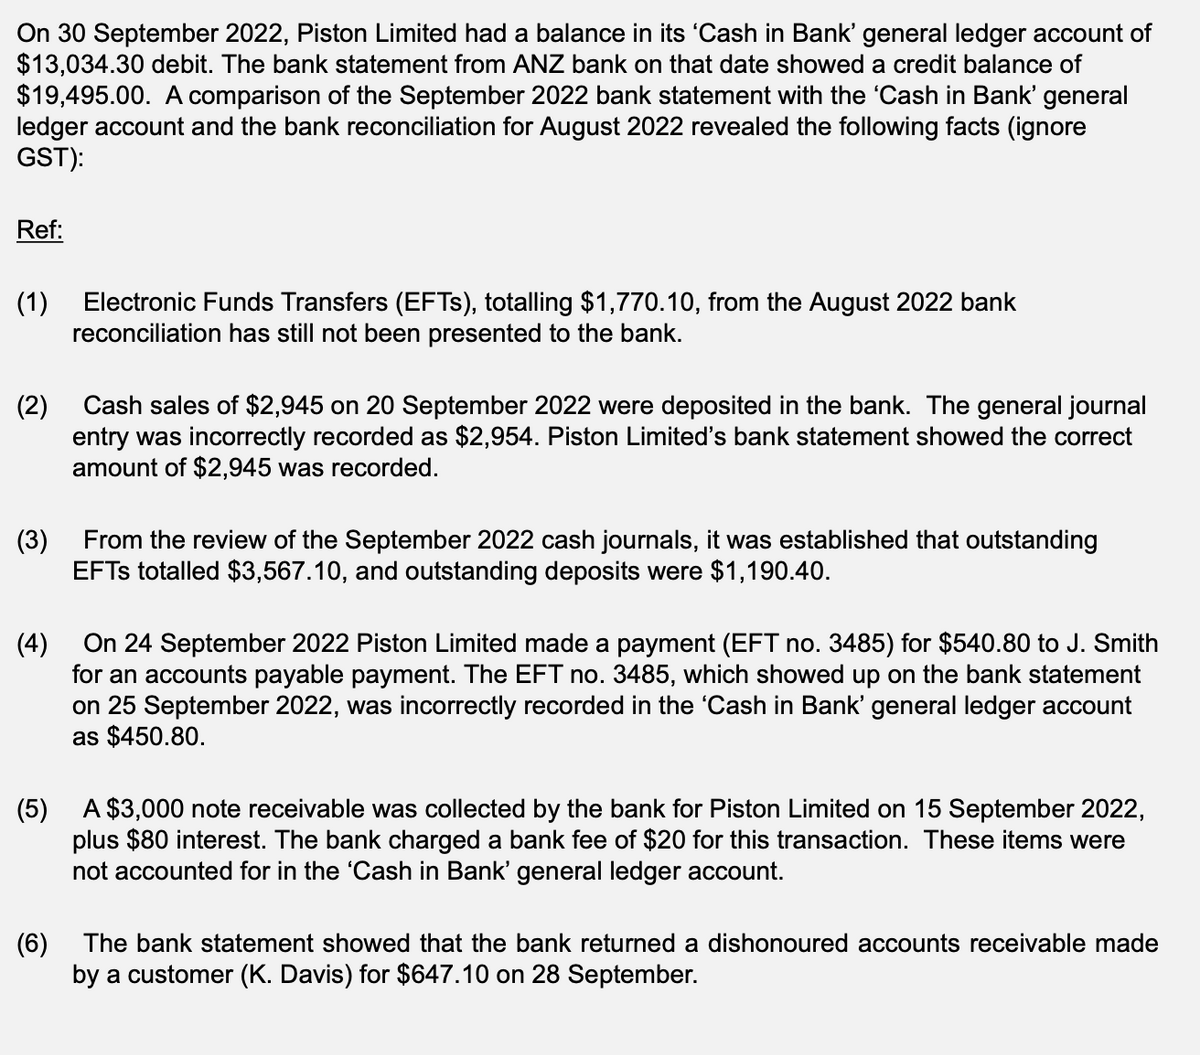 On 30 September 2022, Piston Limited had a balance in its 'Cash in Bank' general ledger account of
$13,034.30 debit. The bank statement from ANZ bank on that date showed a credit balance of
$19,495.00. A comparison of the September 2022 bank statement with the 'Cash in Bank' general
ledger account and the bank reconciliation for August 2022 revealed the following facts (ignore
GST):
Ref:
(1)
(2)
(3)
Electronic Funds Transfers (EFTs), totalling $1,770.10, from the August 2022 bank
reconciliation has still not been presented to the bank.
Cash sales of $2,945 on 20 September 2022 were deposited in the bank. The general journal
entry was incorrectly recorded as $2,954. Piston Limited's bank statement showed the correct
amount of $2,945 was recorded.
From the review of the September 2022 cash journals, it was established that outstanding
EFTs totalled $3,567.10, and outstanding deposits were $1,190.40.
(4)
On 24 September 2022 Piston Limited made a payment (EFT no. 3485) for $540.80 to J. Smith
for an accounts payable payment. The EFT no. 3485, which showed up on the bank statement
on 25 September 2022, was incorrectly recorded in the 'Cash in Bank' general ledger account
as $450.80.
(5)
A $3,000 note receivable was collected by the bank for Piston Limited on 15 September 2022,
plus $80 interest. The bank charged a bank fee of $20 for this transaction. These items were
not accounted for in the 'Cash in Bank' general ledger account.
(6) The bank statement showed that the bank returned a dishonoured accounts receivable made
by a customer (K. Davis) for $647.10 on 28 September.